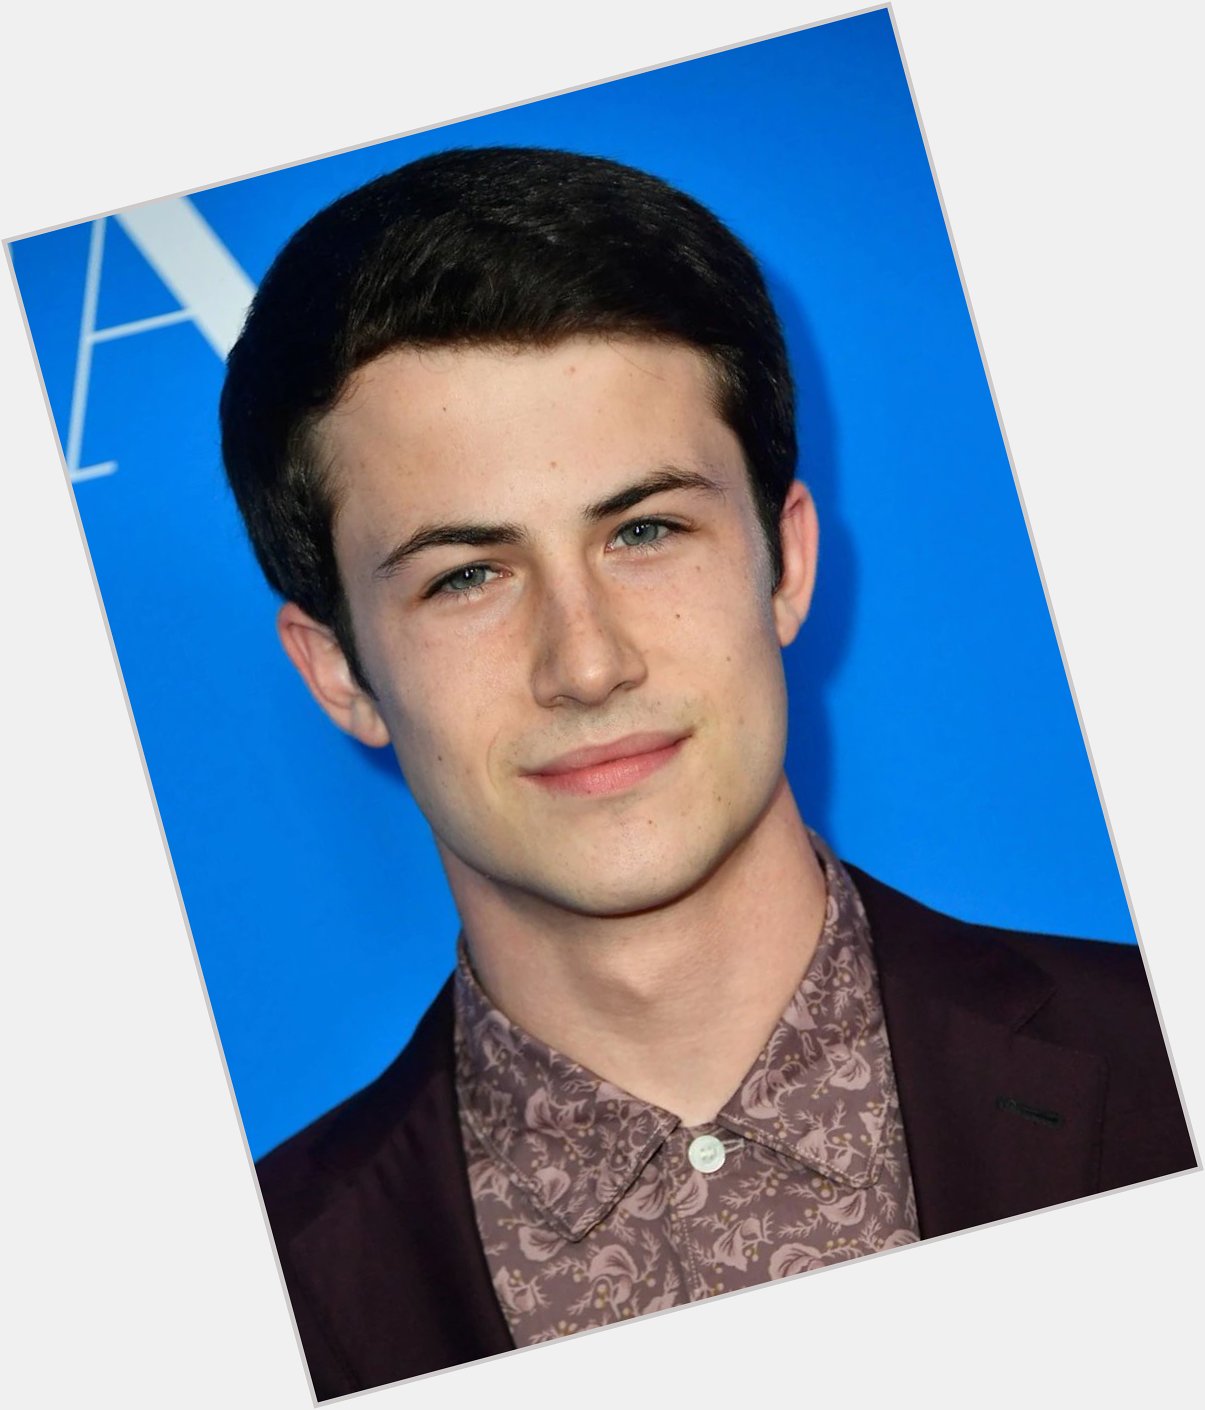 Happy birthday to Dylan Minnette 
We have seen it in 13 reason why, nightmares, etc. 